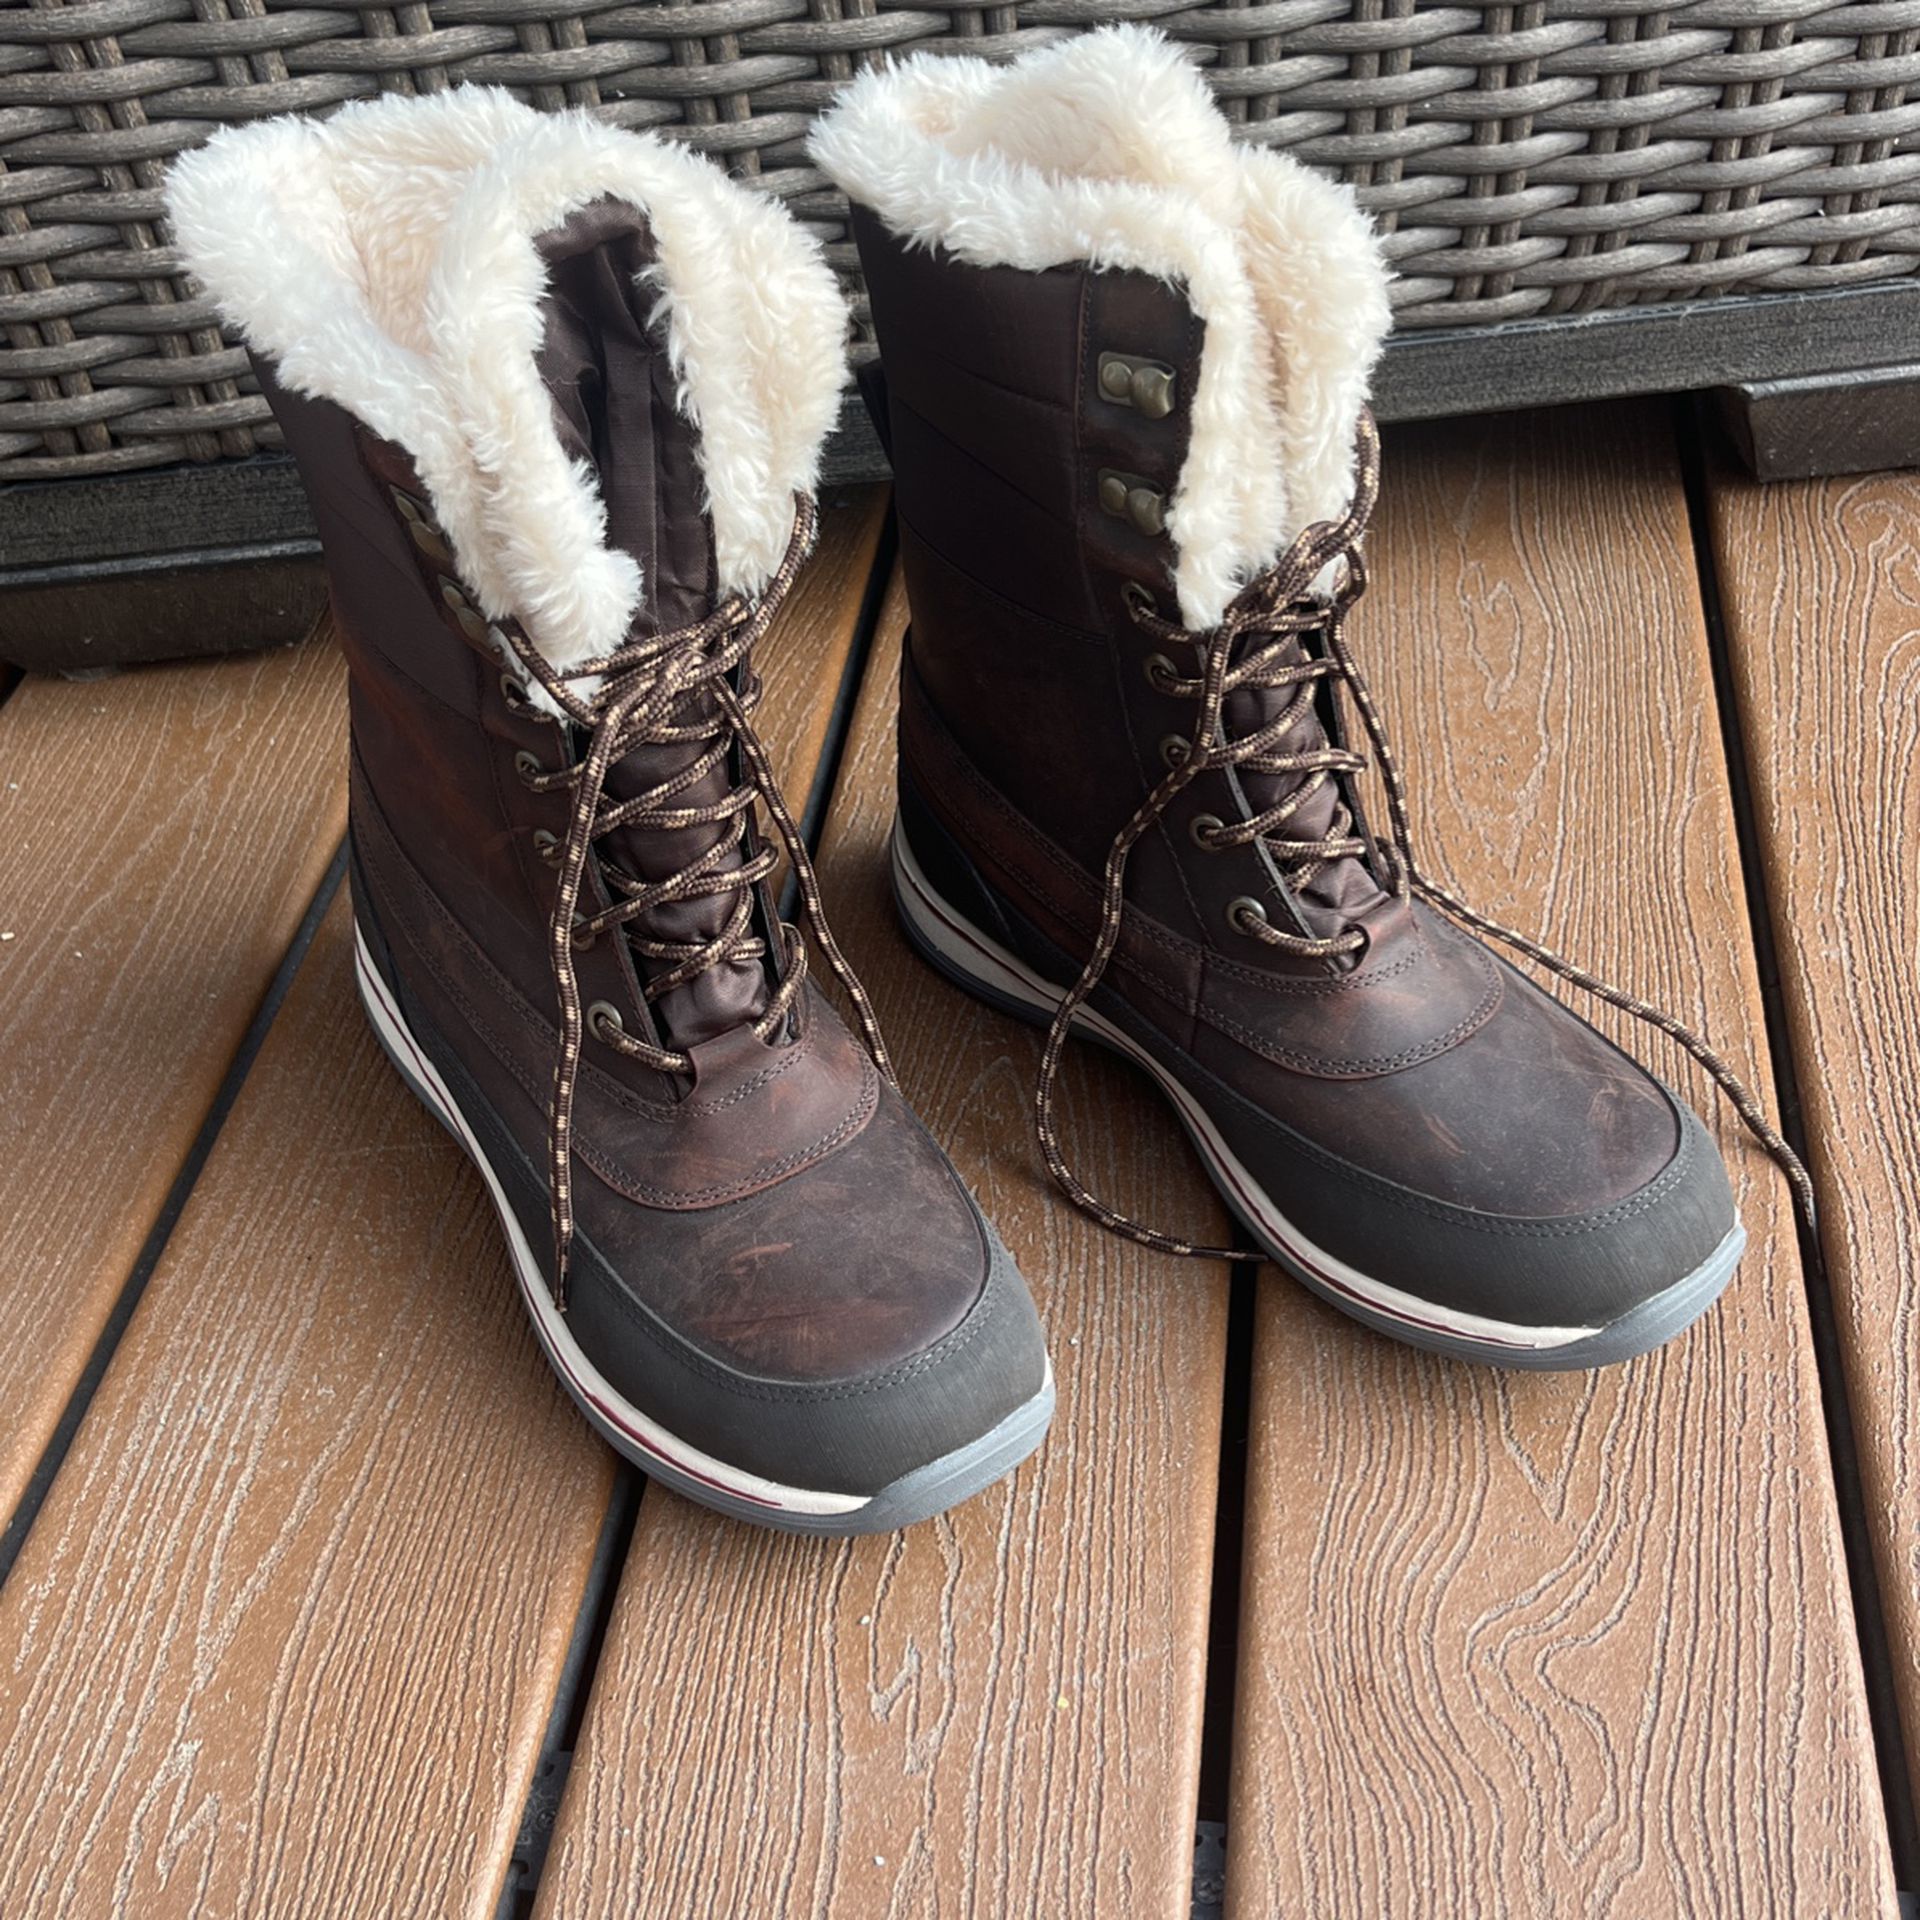 Land’s End Brown Snow Boots, Women’s 8